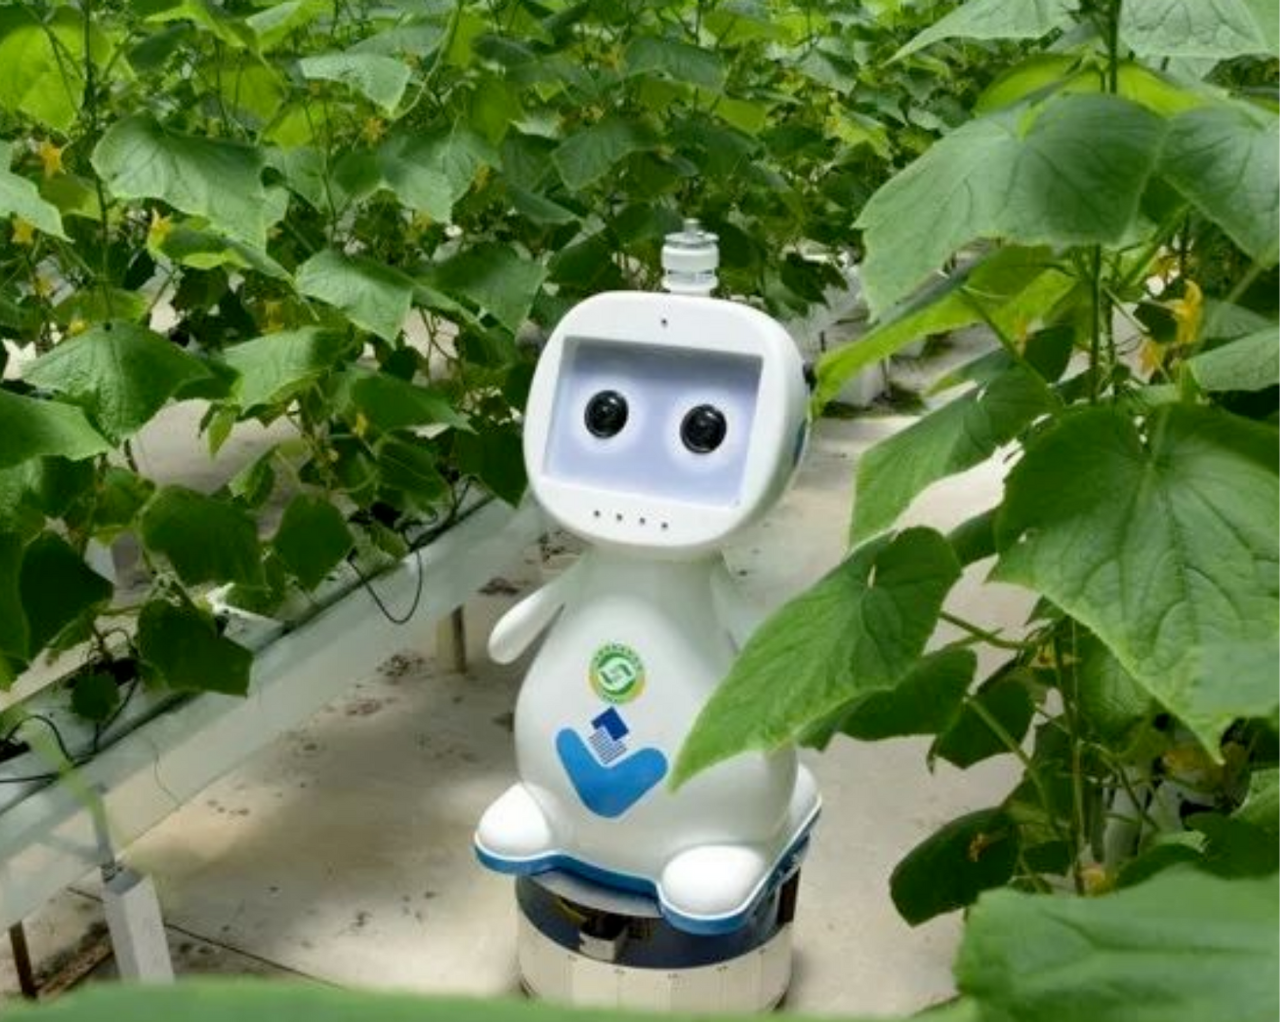 China's First Artificial Intelligence 5G Agricultural Robot Comes Out